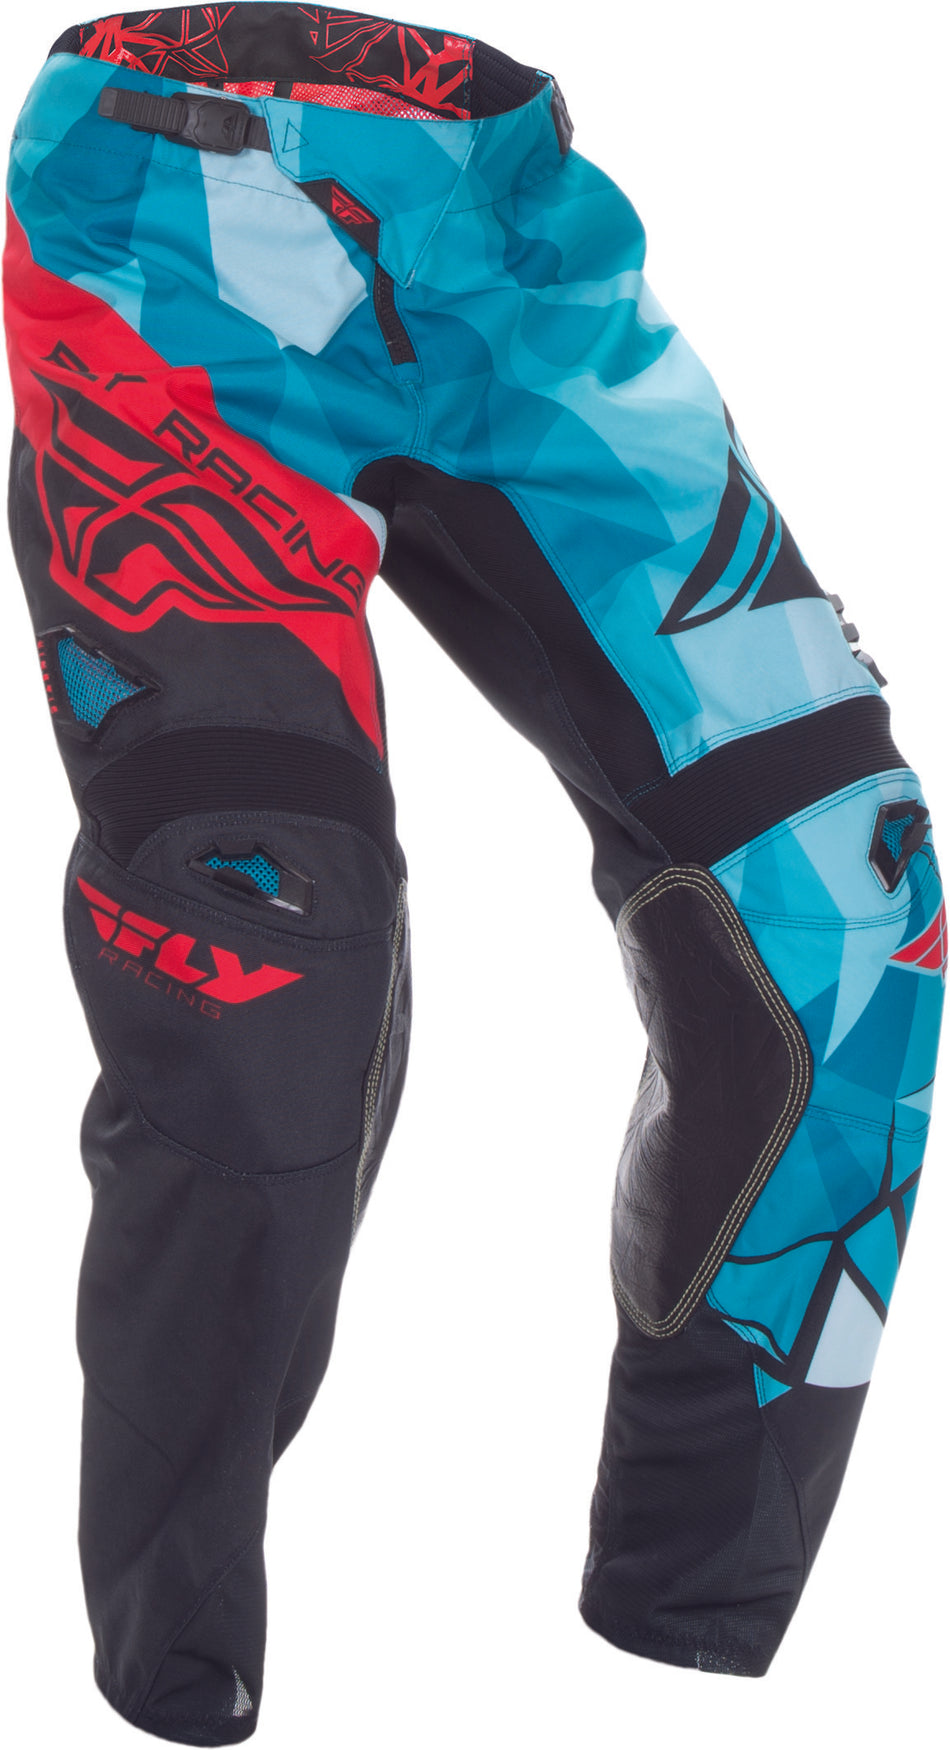 FLY RACING Kinetic Crux Pant Teal/Red Sz 22 370-53922